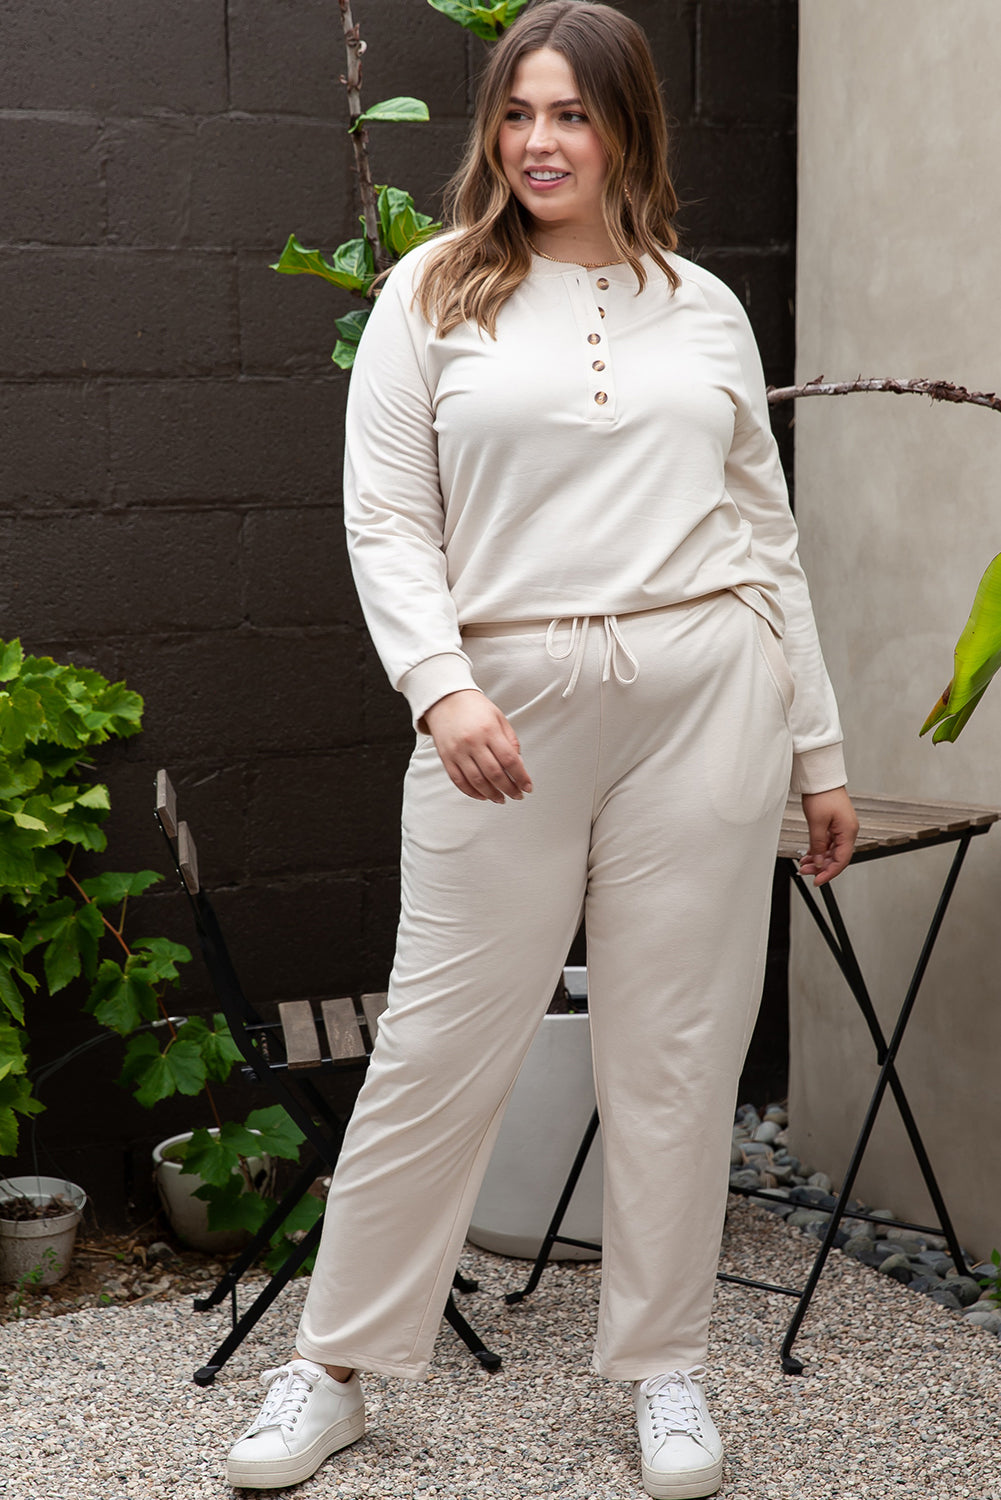 Apricot Plus Size Long Sleeve Henley Top Drawstring Pants Outfit